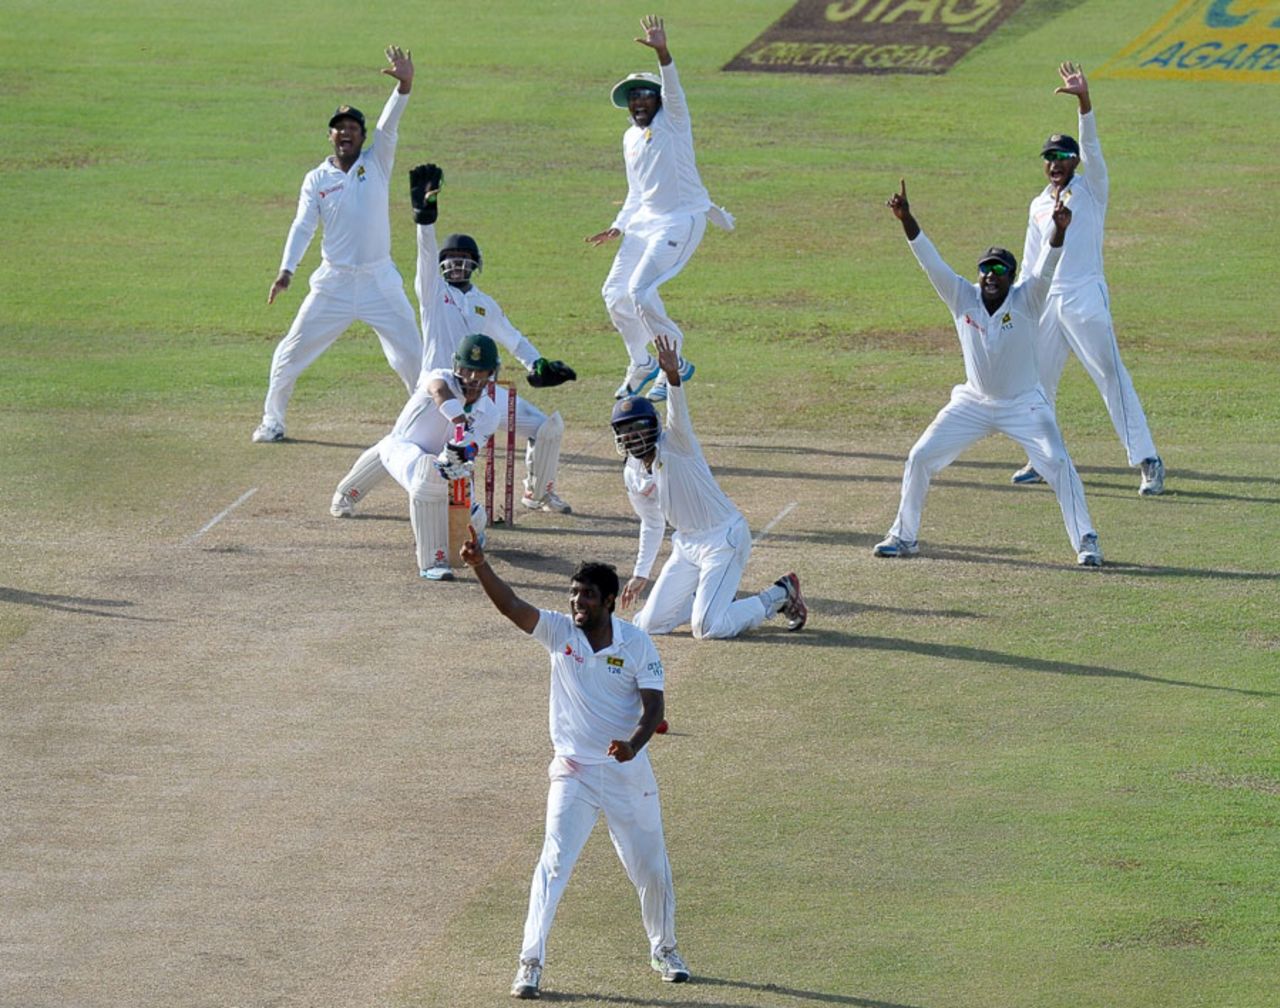 The Sri Lanka players are up in arms for the wicket of JP Duminy, Sri Lanka v South Africa, 2nd Test, Colombo, 5th day, July 28, 2014